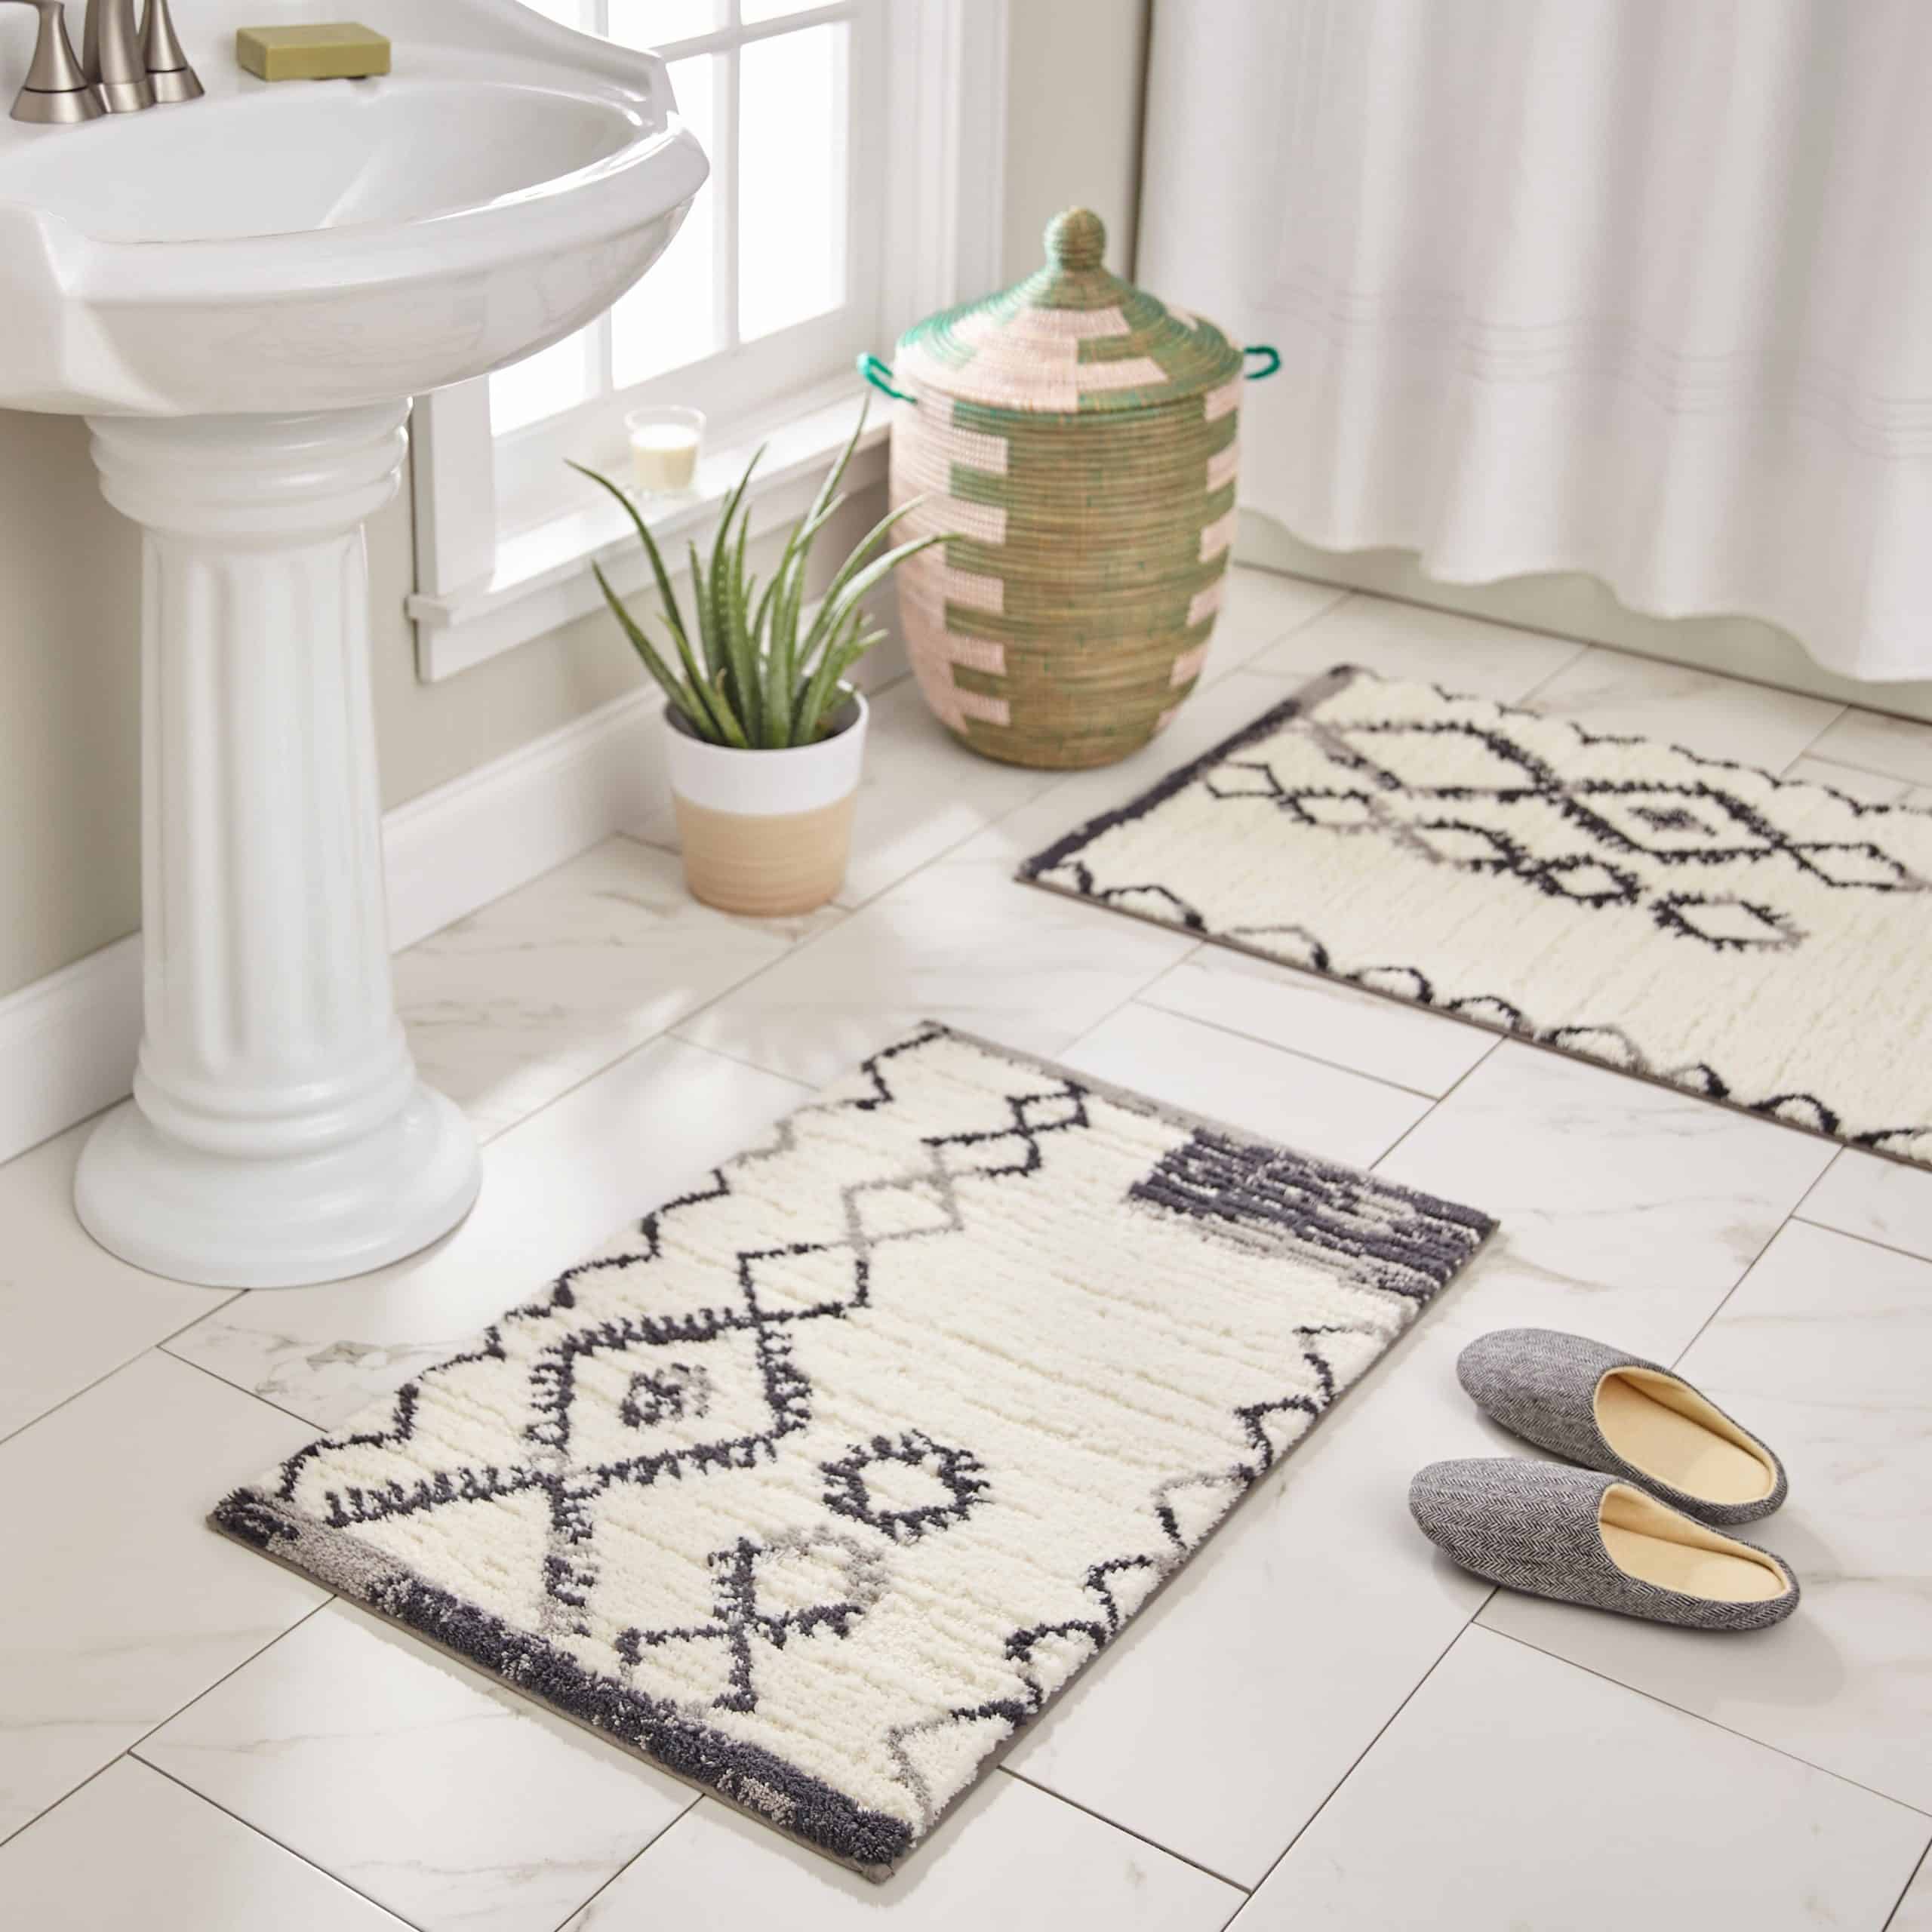 A Good Bath Rug Is A Game-Changer When You Want To Achieve A Coastal Look